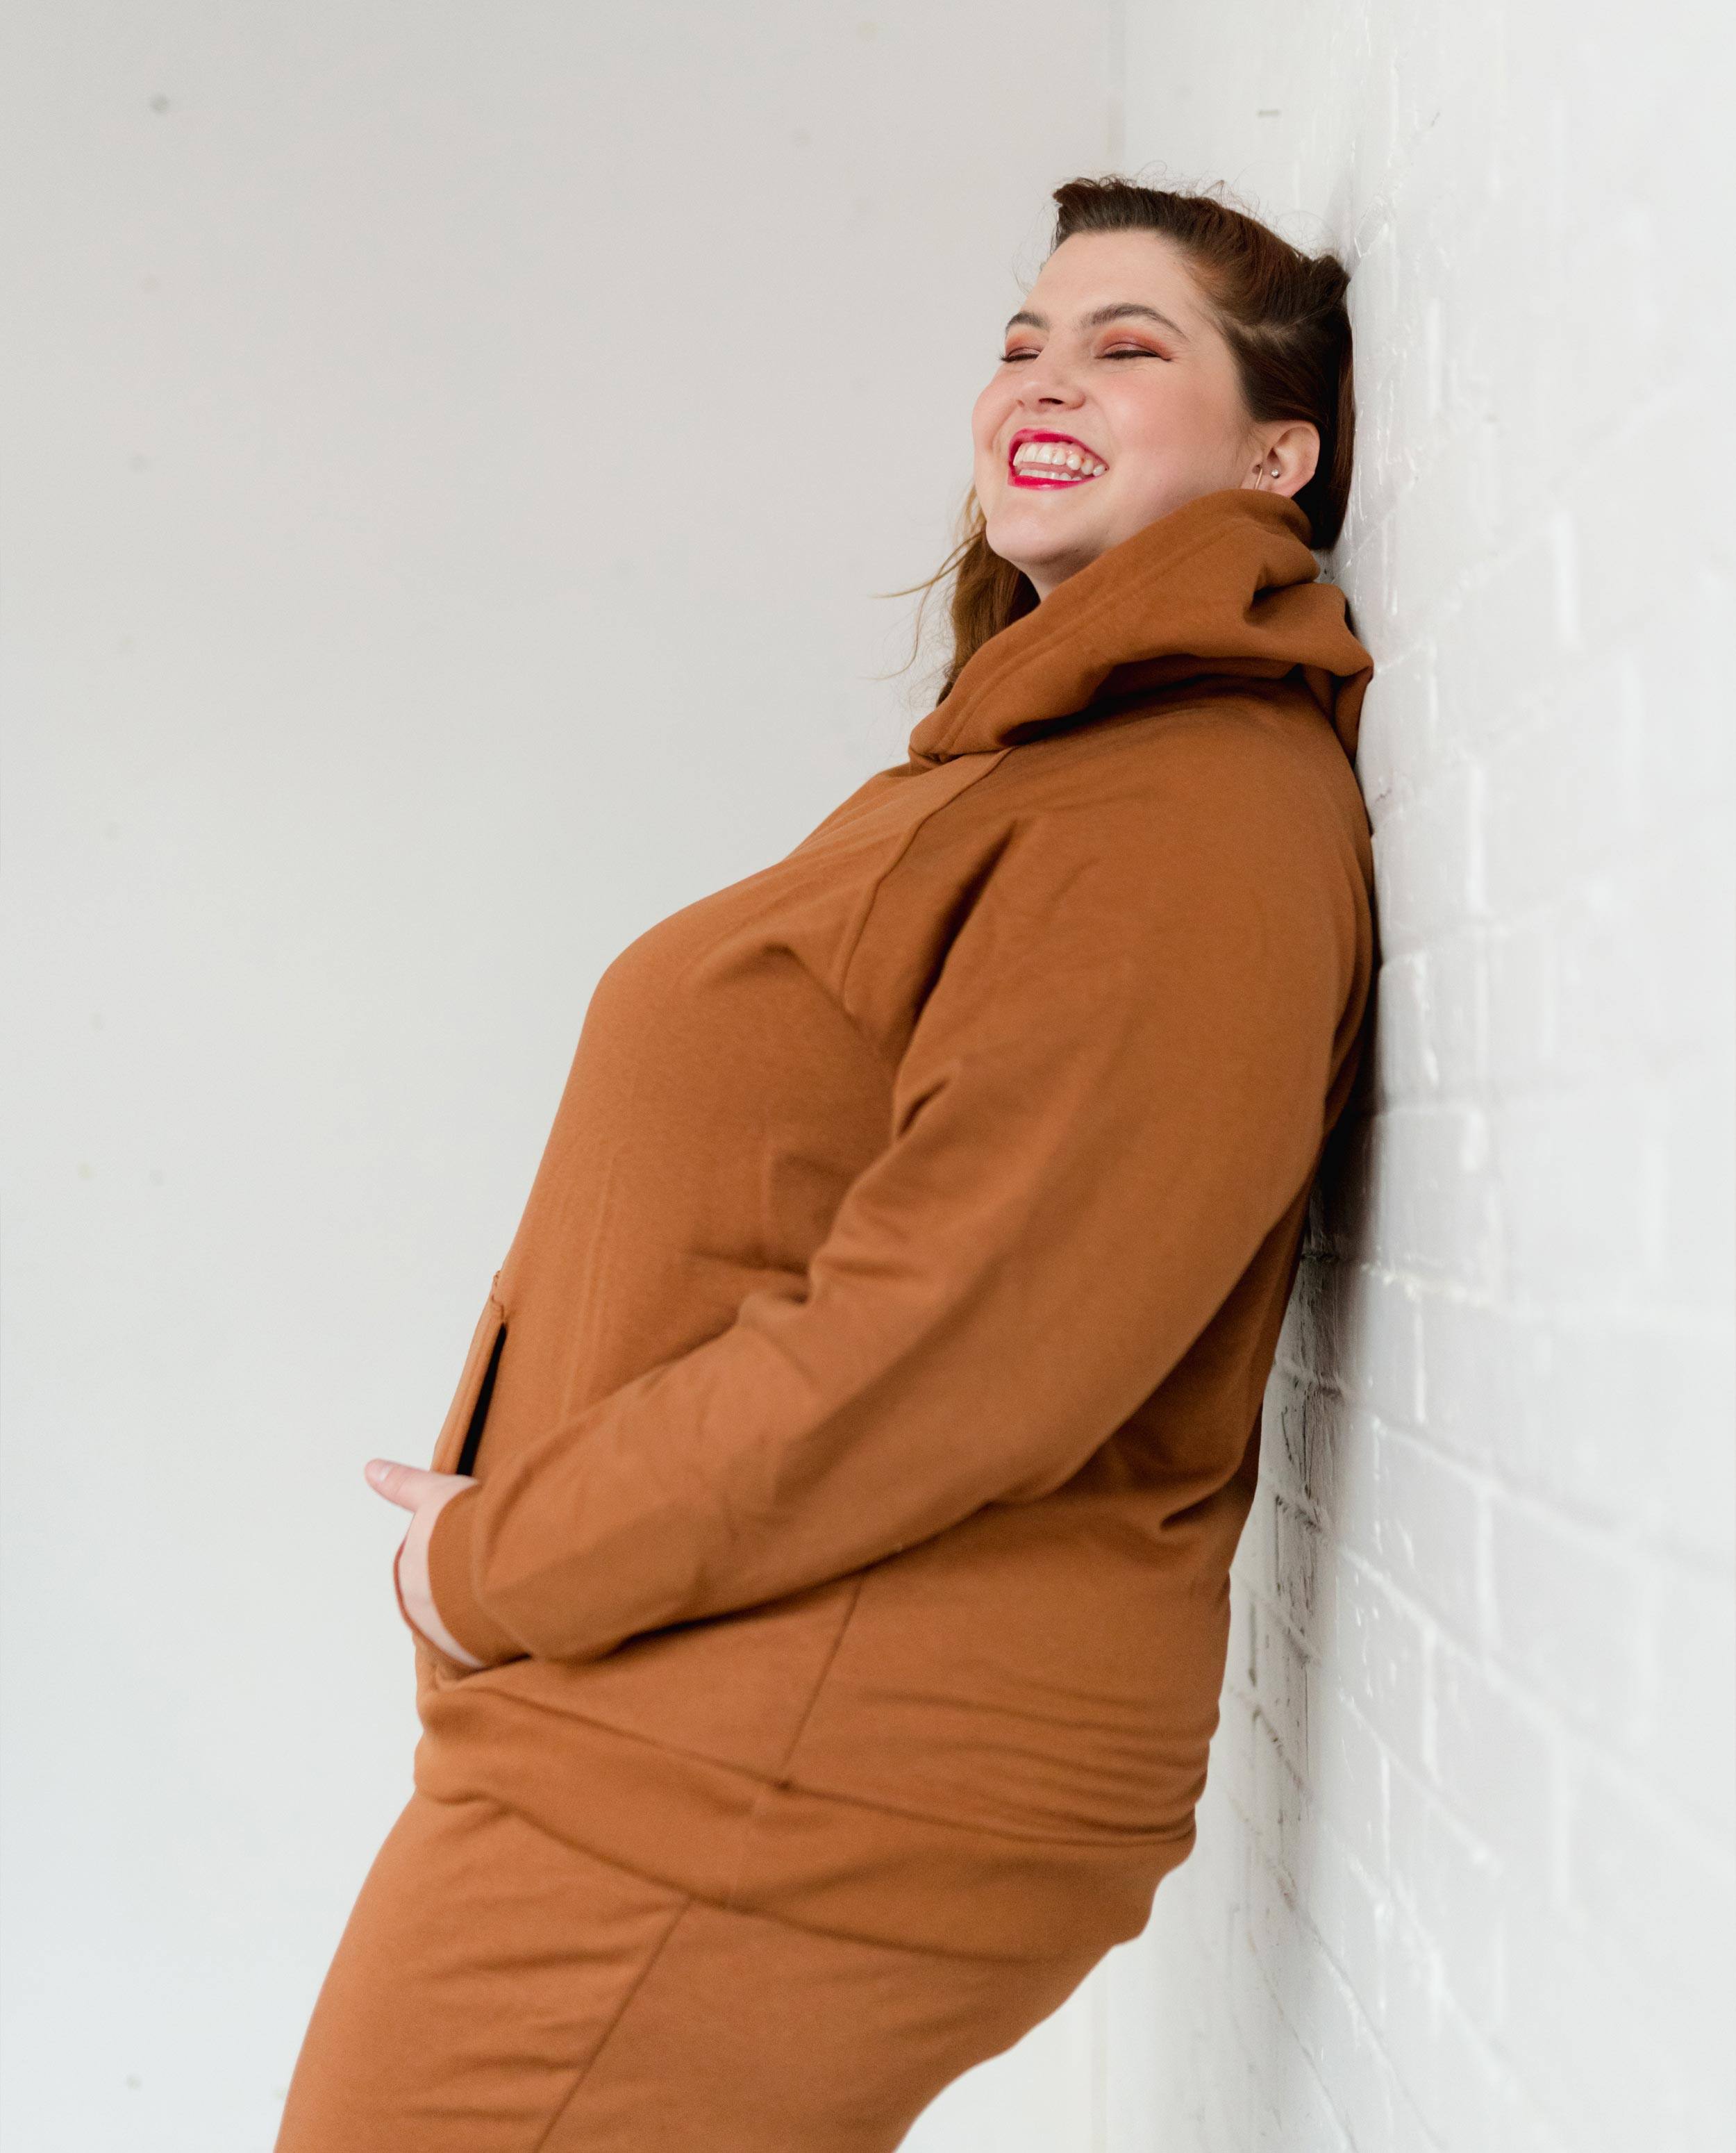 The Warehouse Sale Hoodie | FRANC Sustainable Clothing